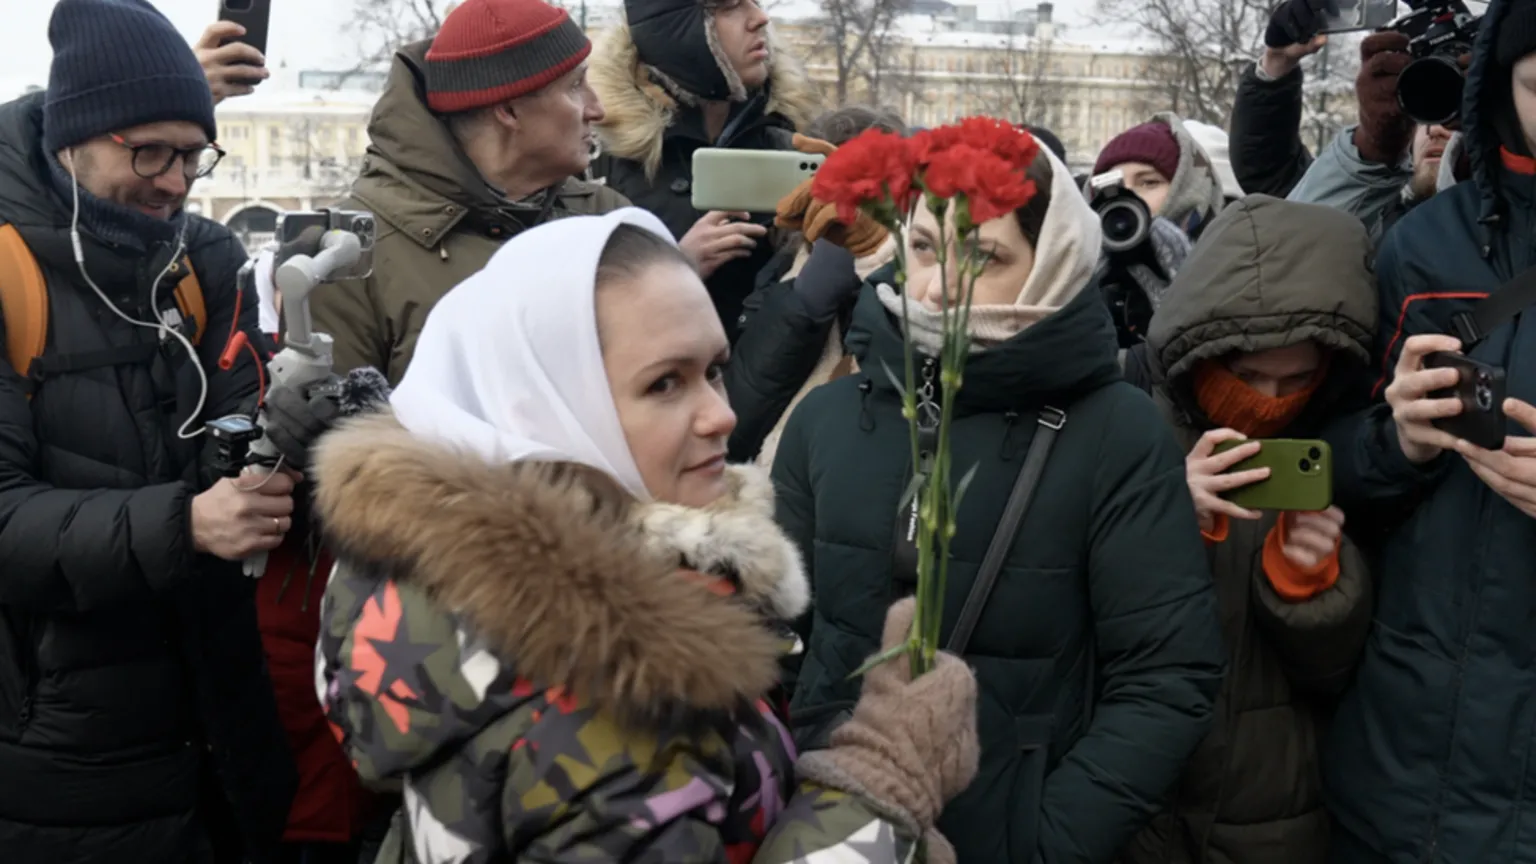 ‘Send back our husbands’ – Russian women in rare protest (bbc.com)